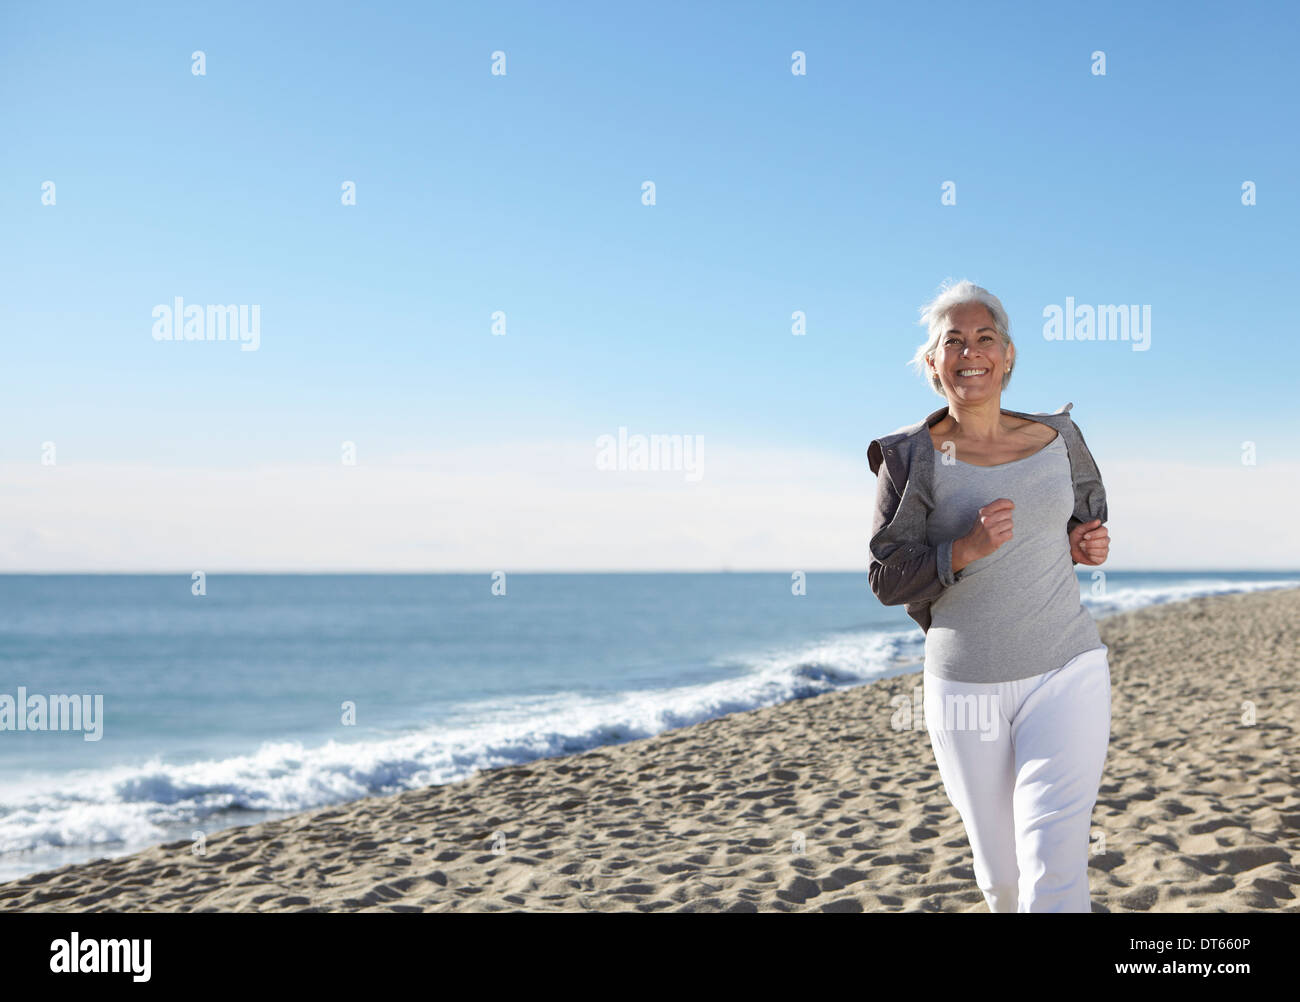 Young woman jogging on beach Banque D'Images